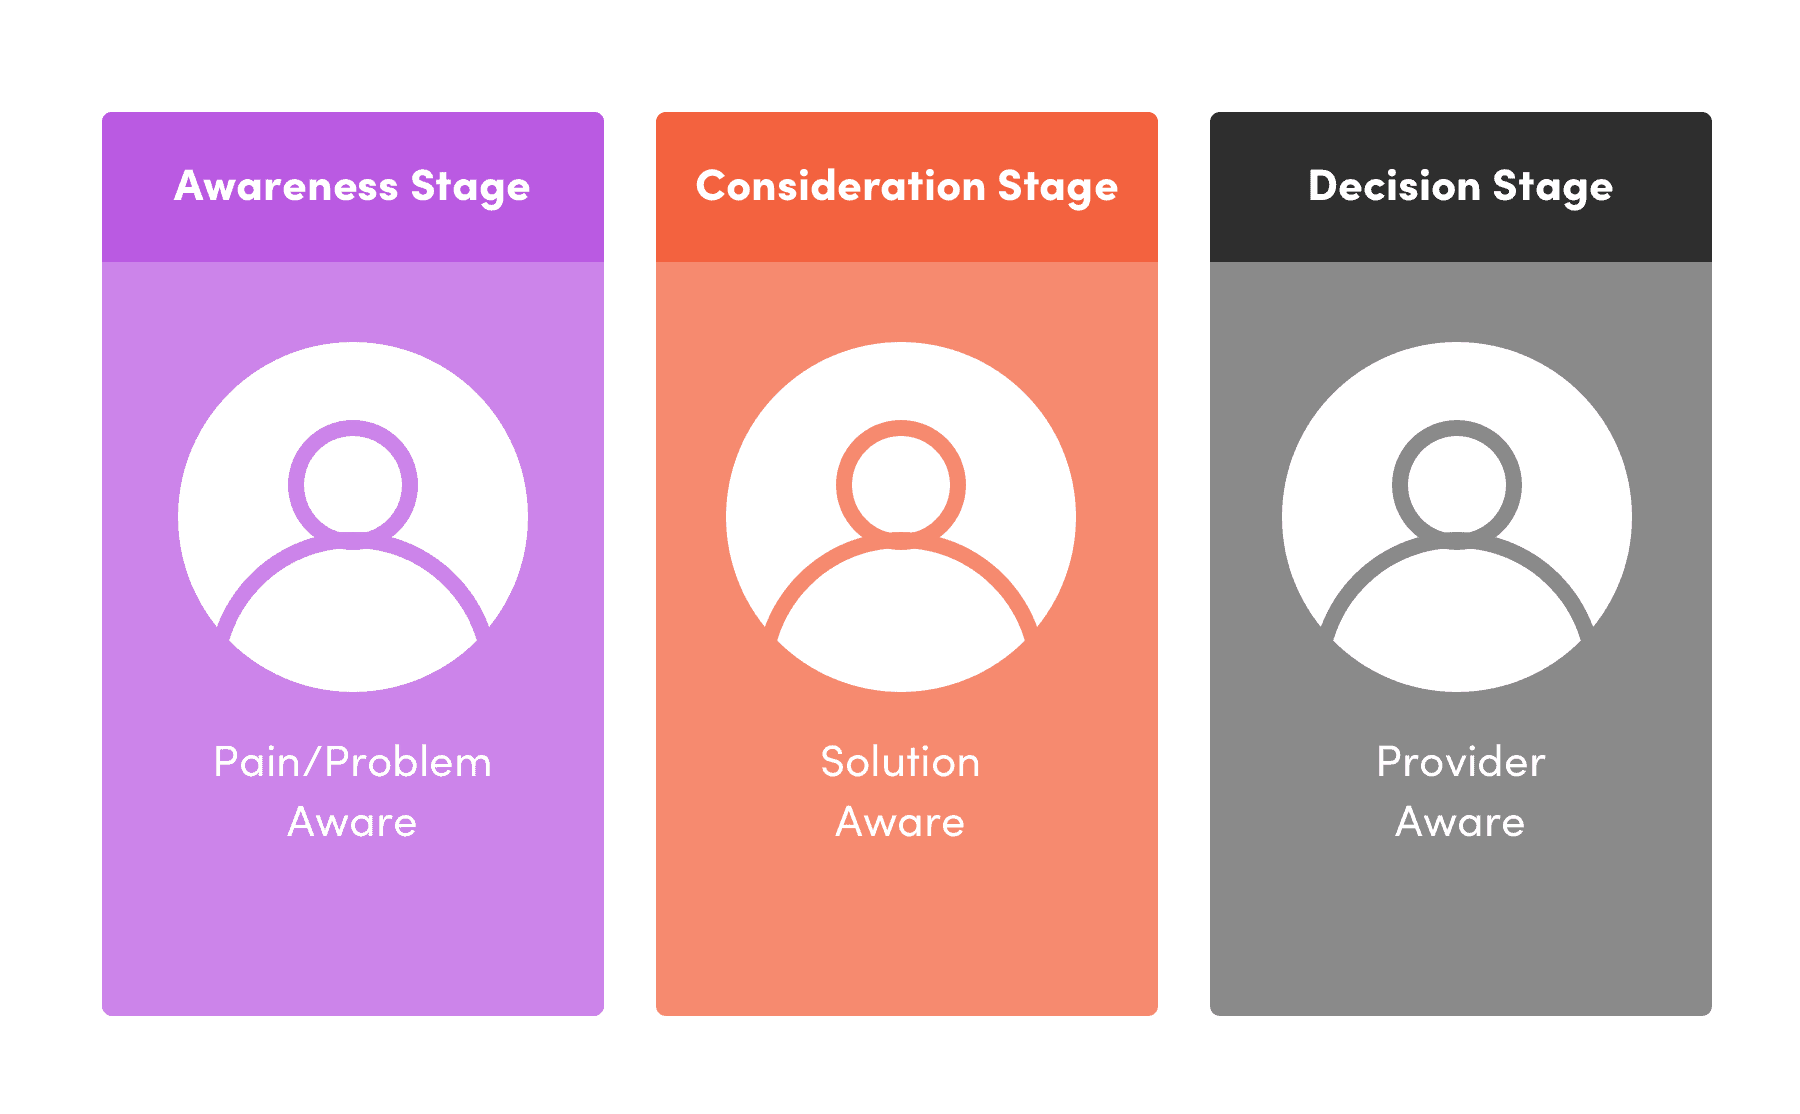 A graphic showing three stages of a buyer’s journey. There is a purple box labeled “Awareness stage,” an orange box labeled “Consideration Stage,” and a gray and black box labeled “Decision Stage.”